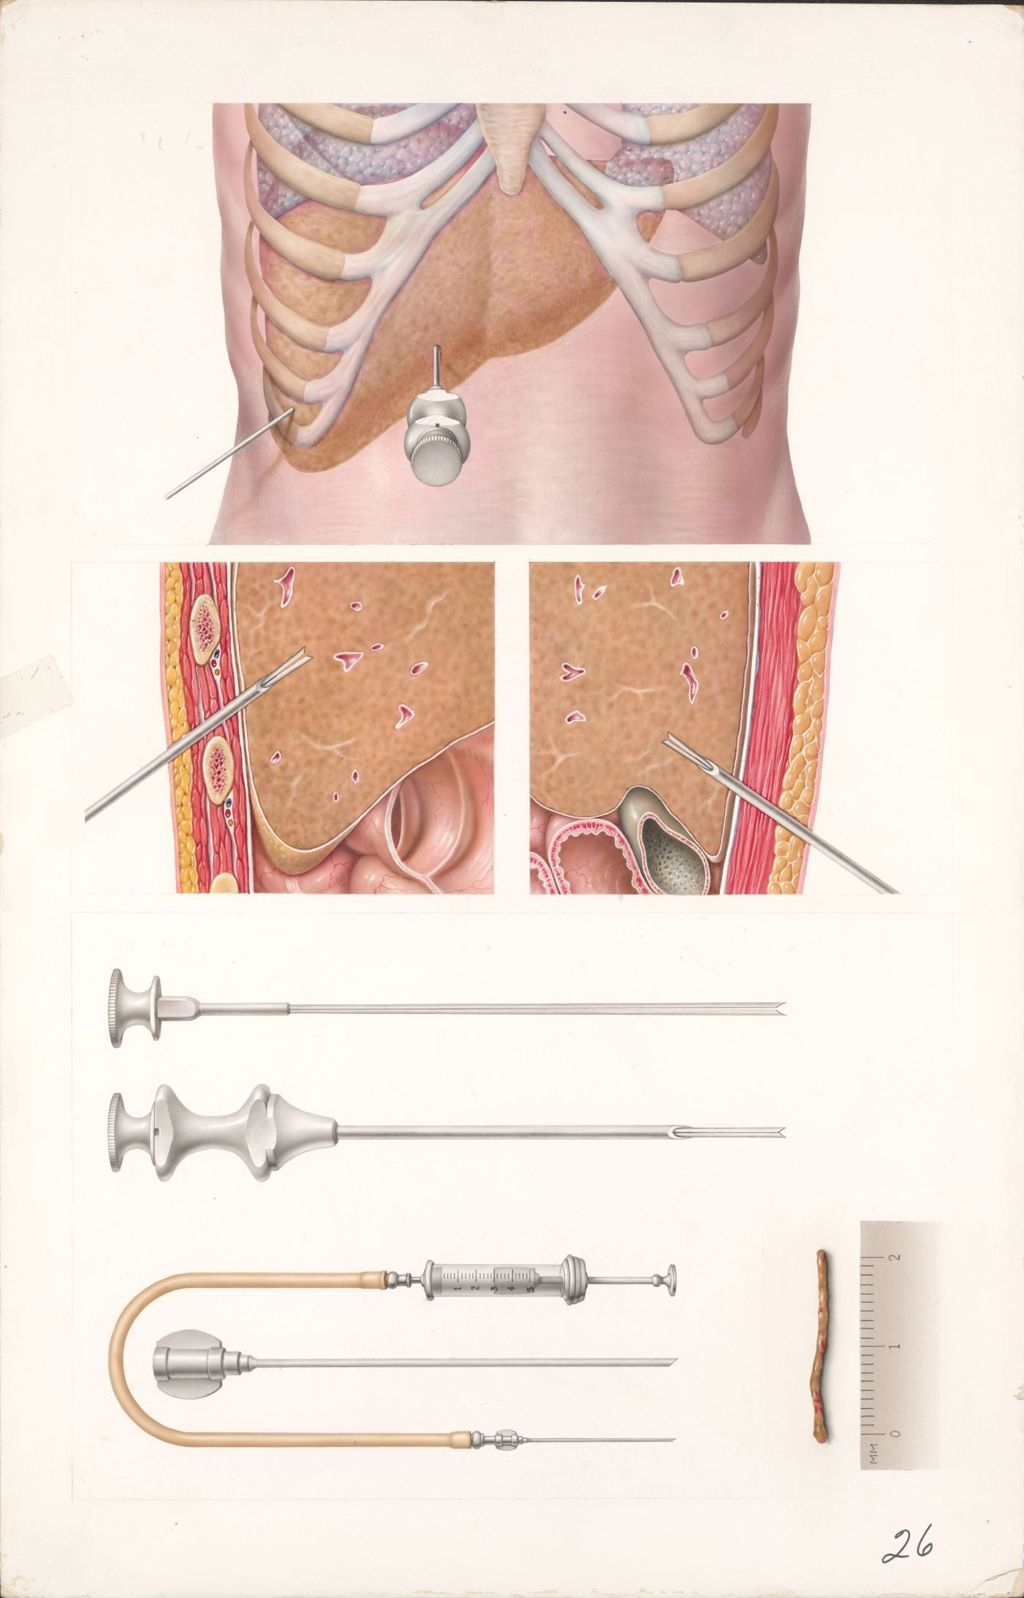 Miniature of Medical Profiles, Diupres-HydroPres, Liver Biopsy, Plate I, Needle Biopsy